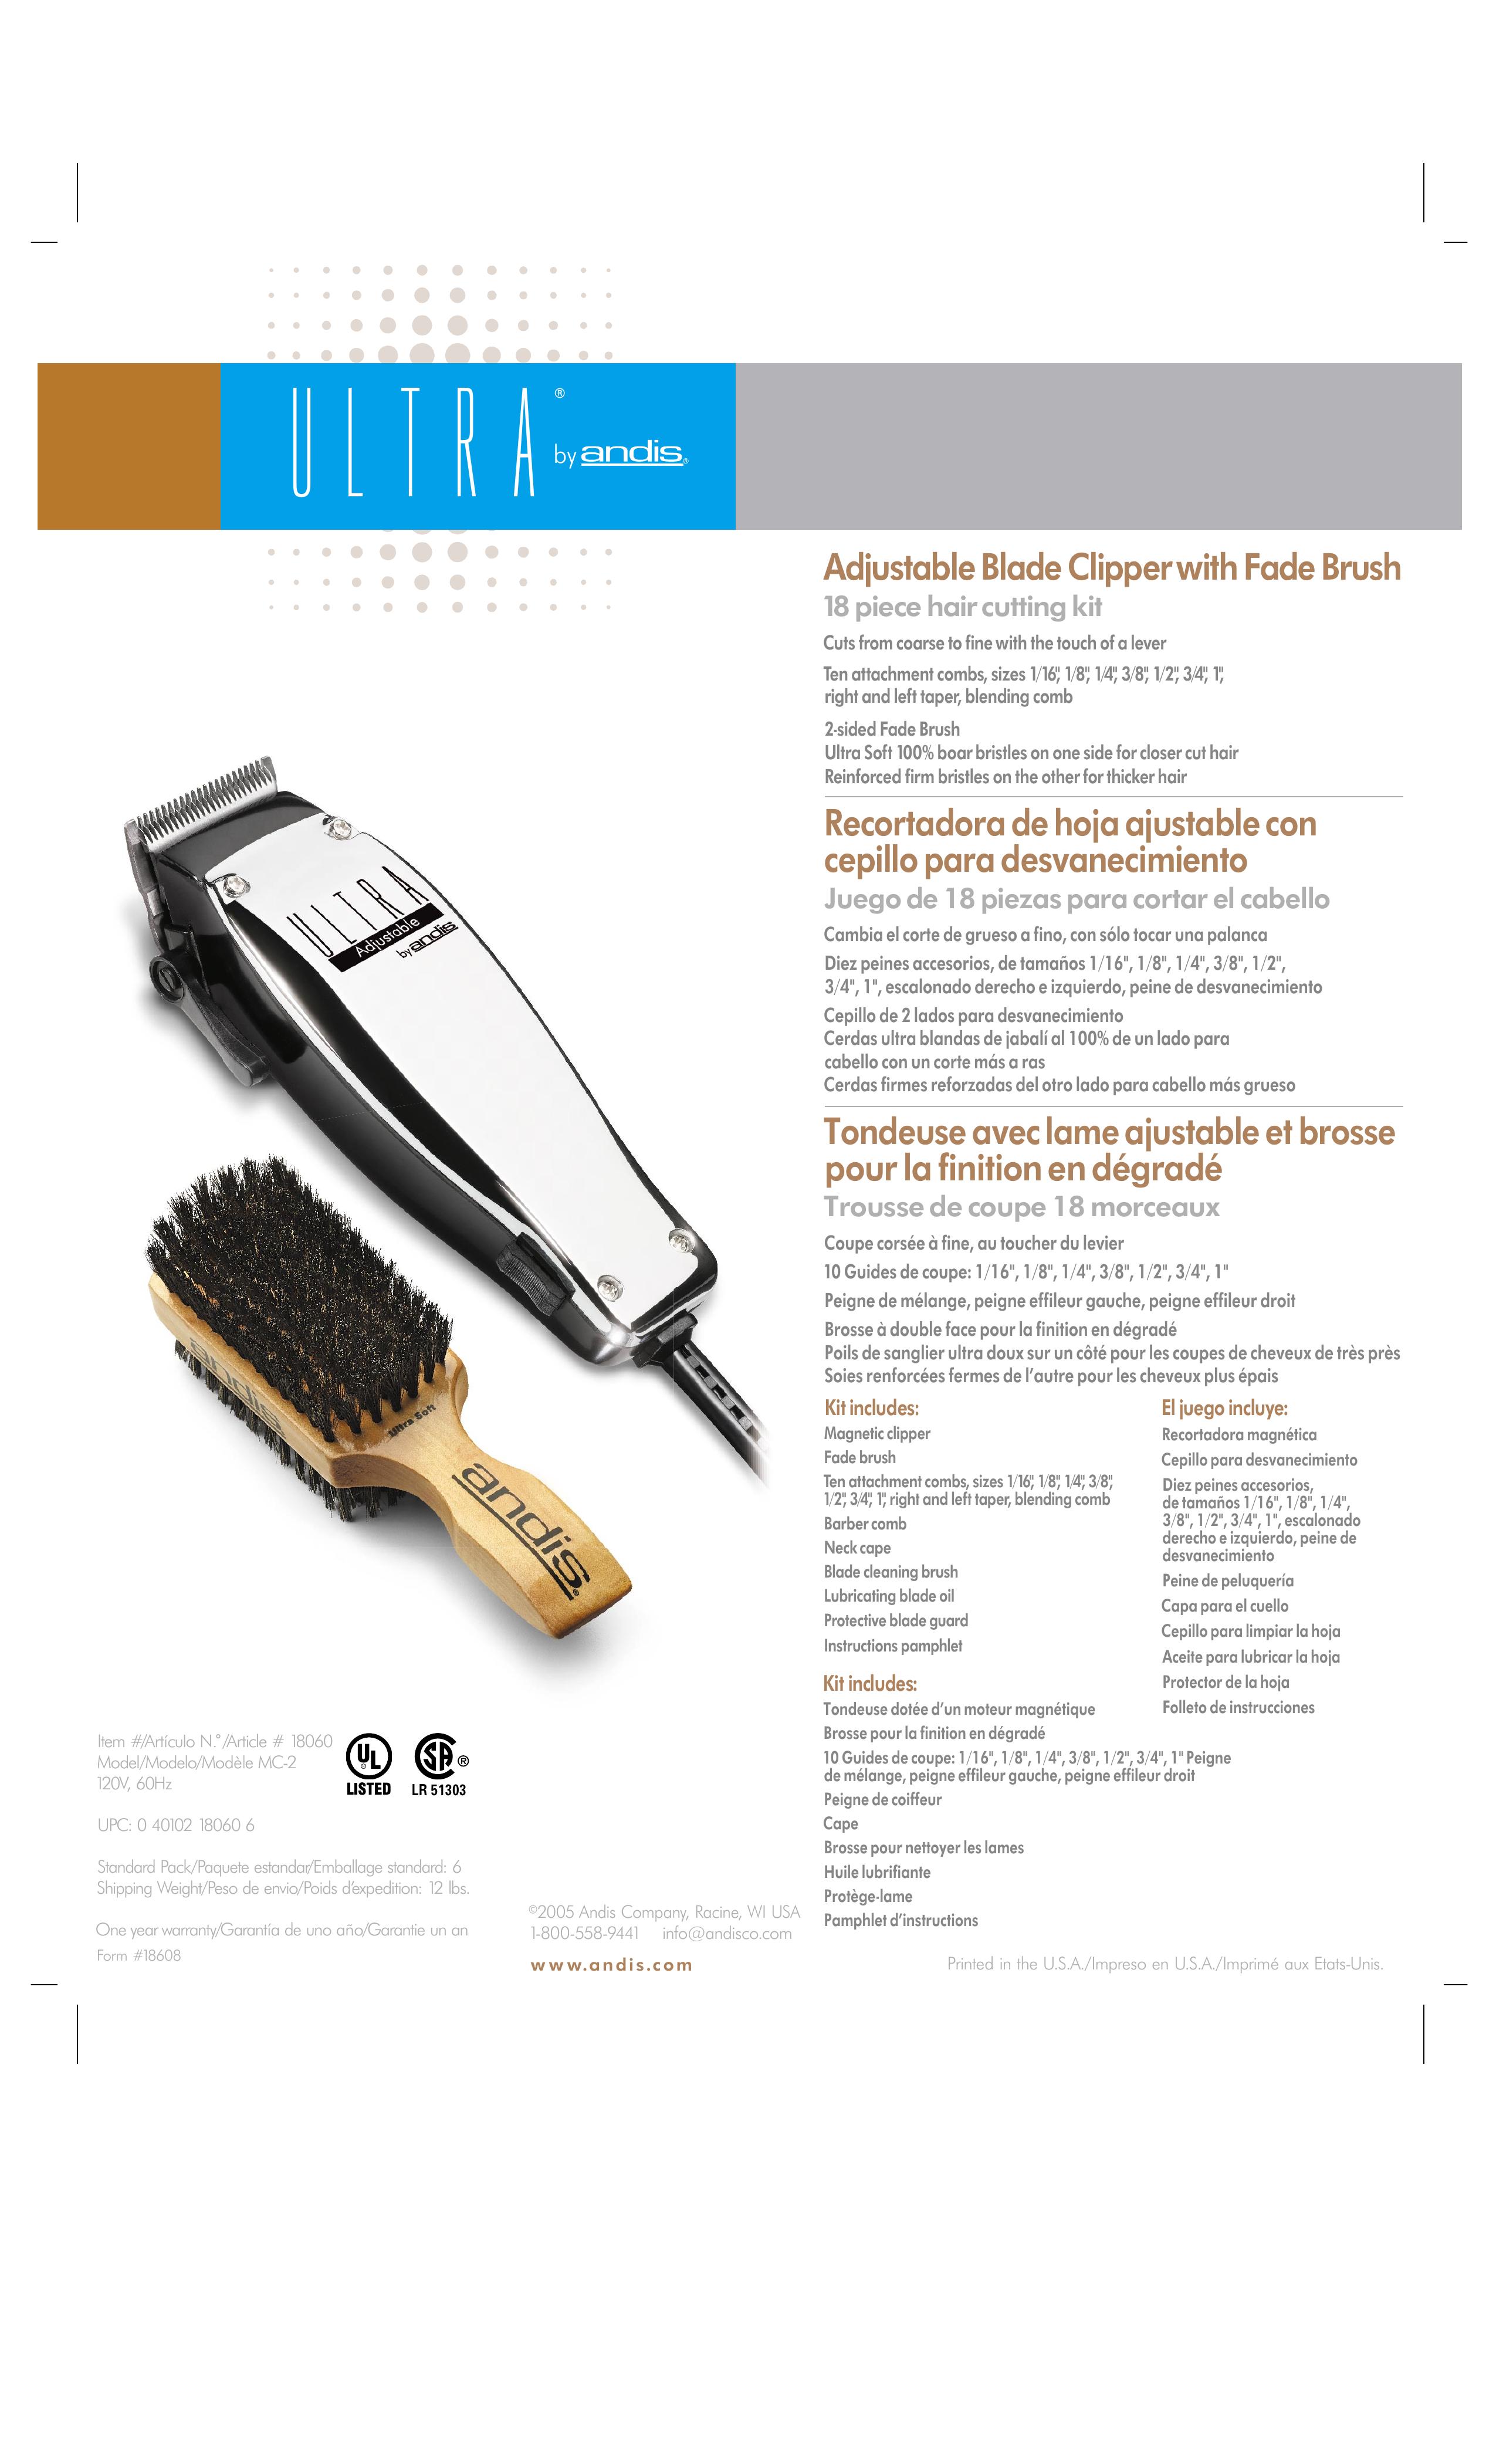 Andis Company C-2le Hair Clippers User Manual